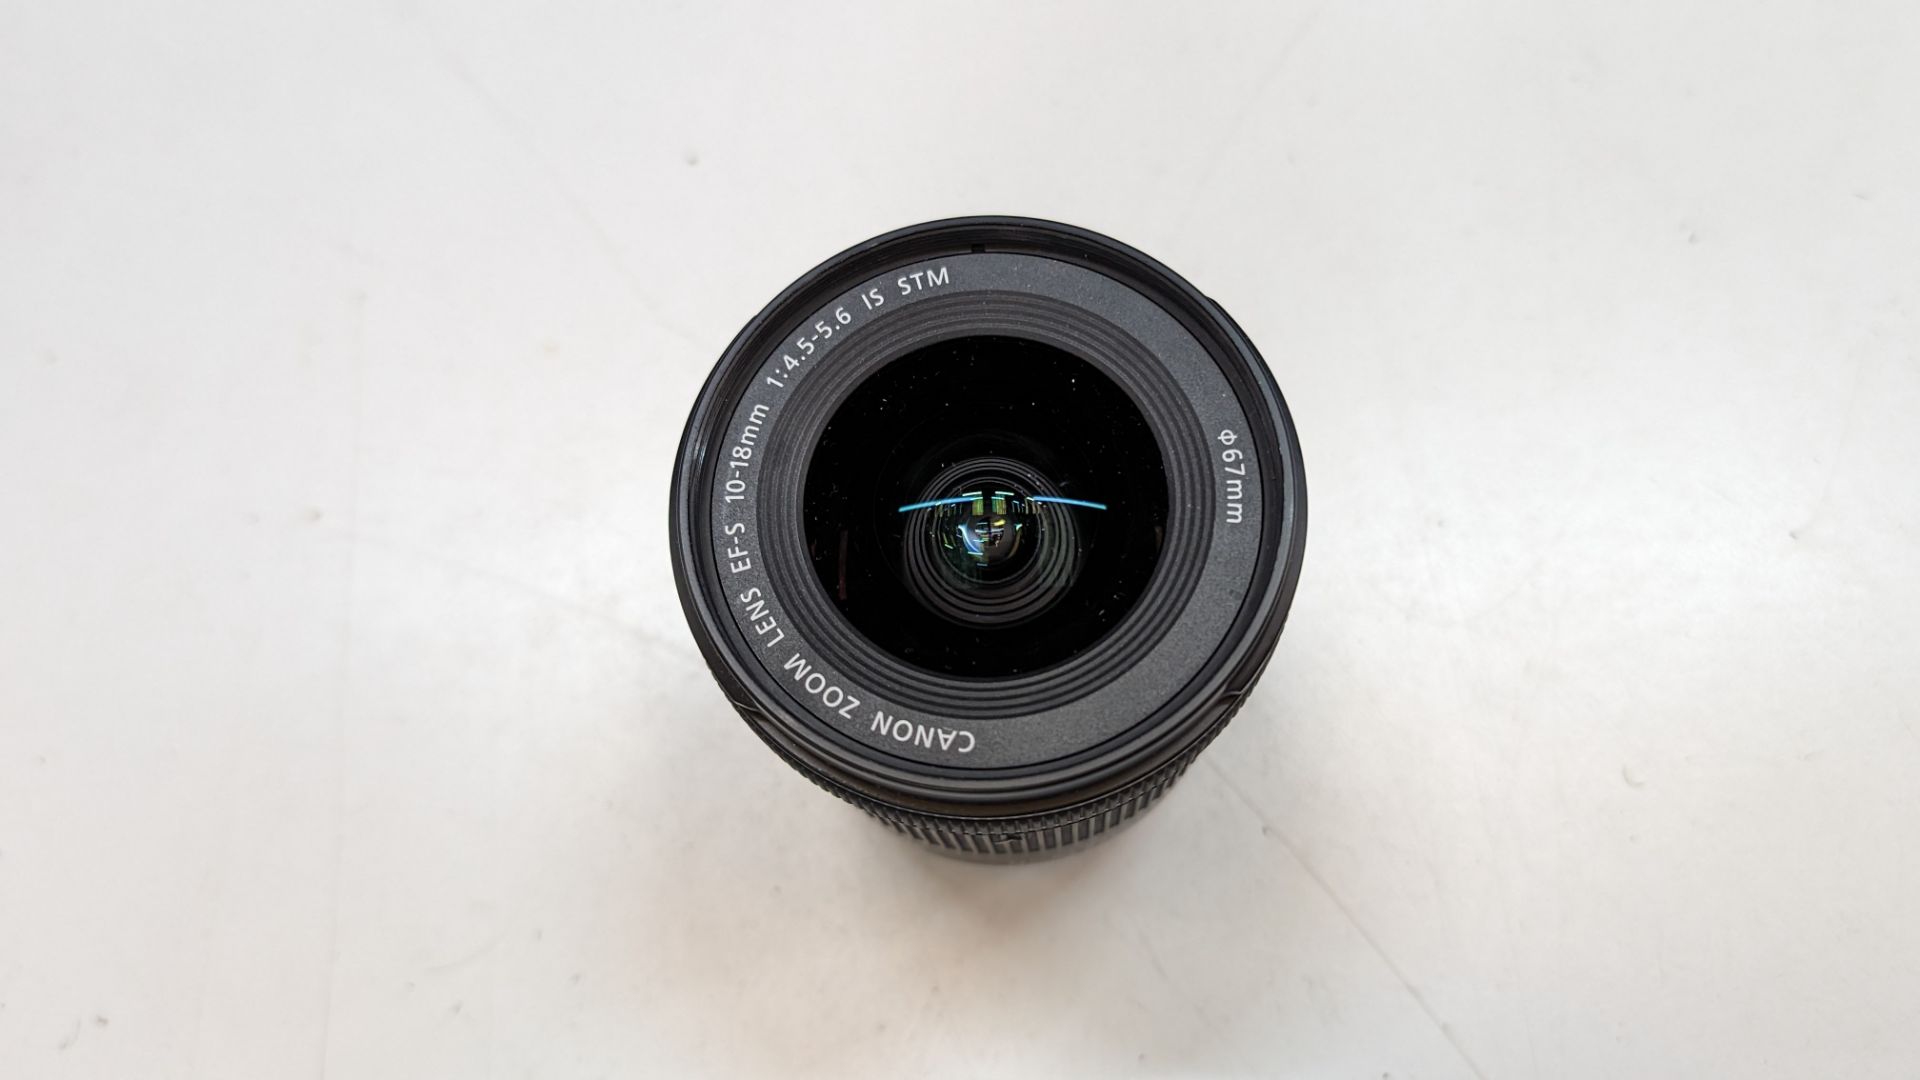 Canon EFS 10-18mm lens - Image 9 of 13